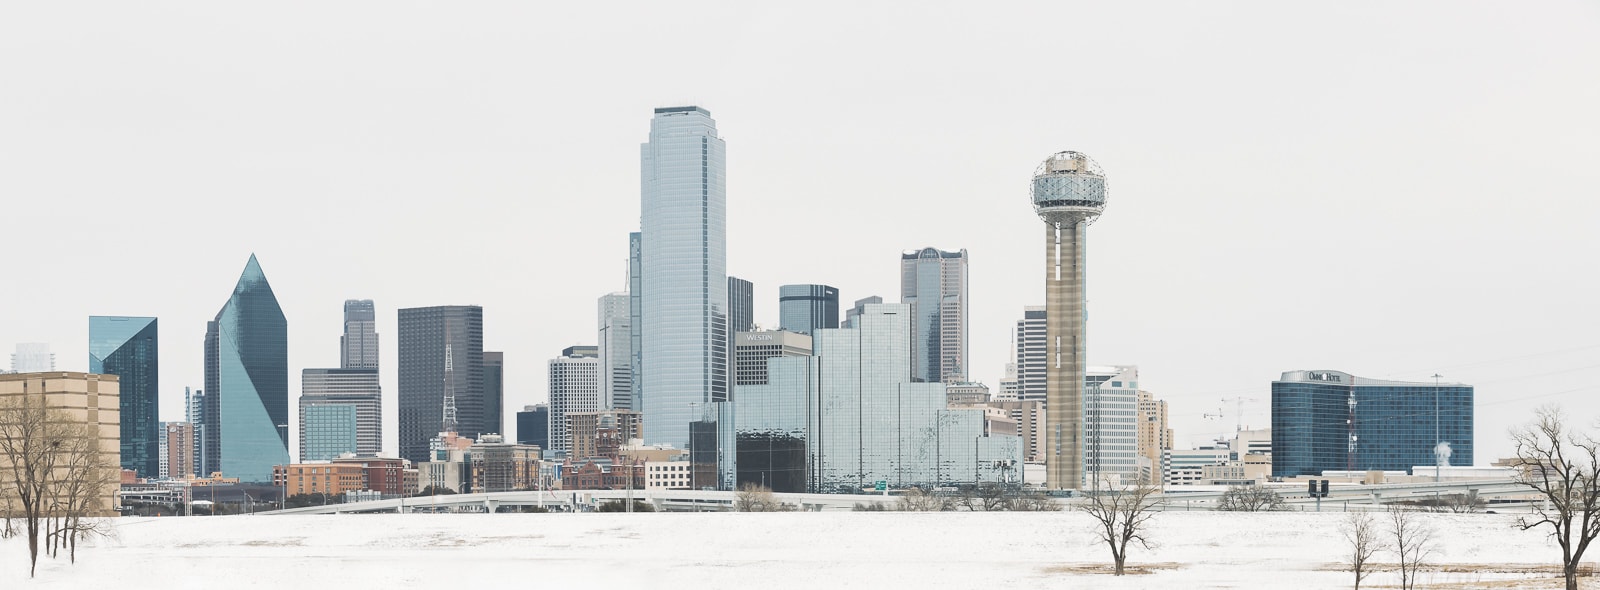 Dallas Winter Storm Photos 2021, A City Covered With Snow